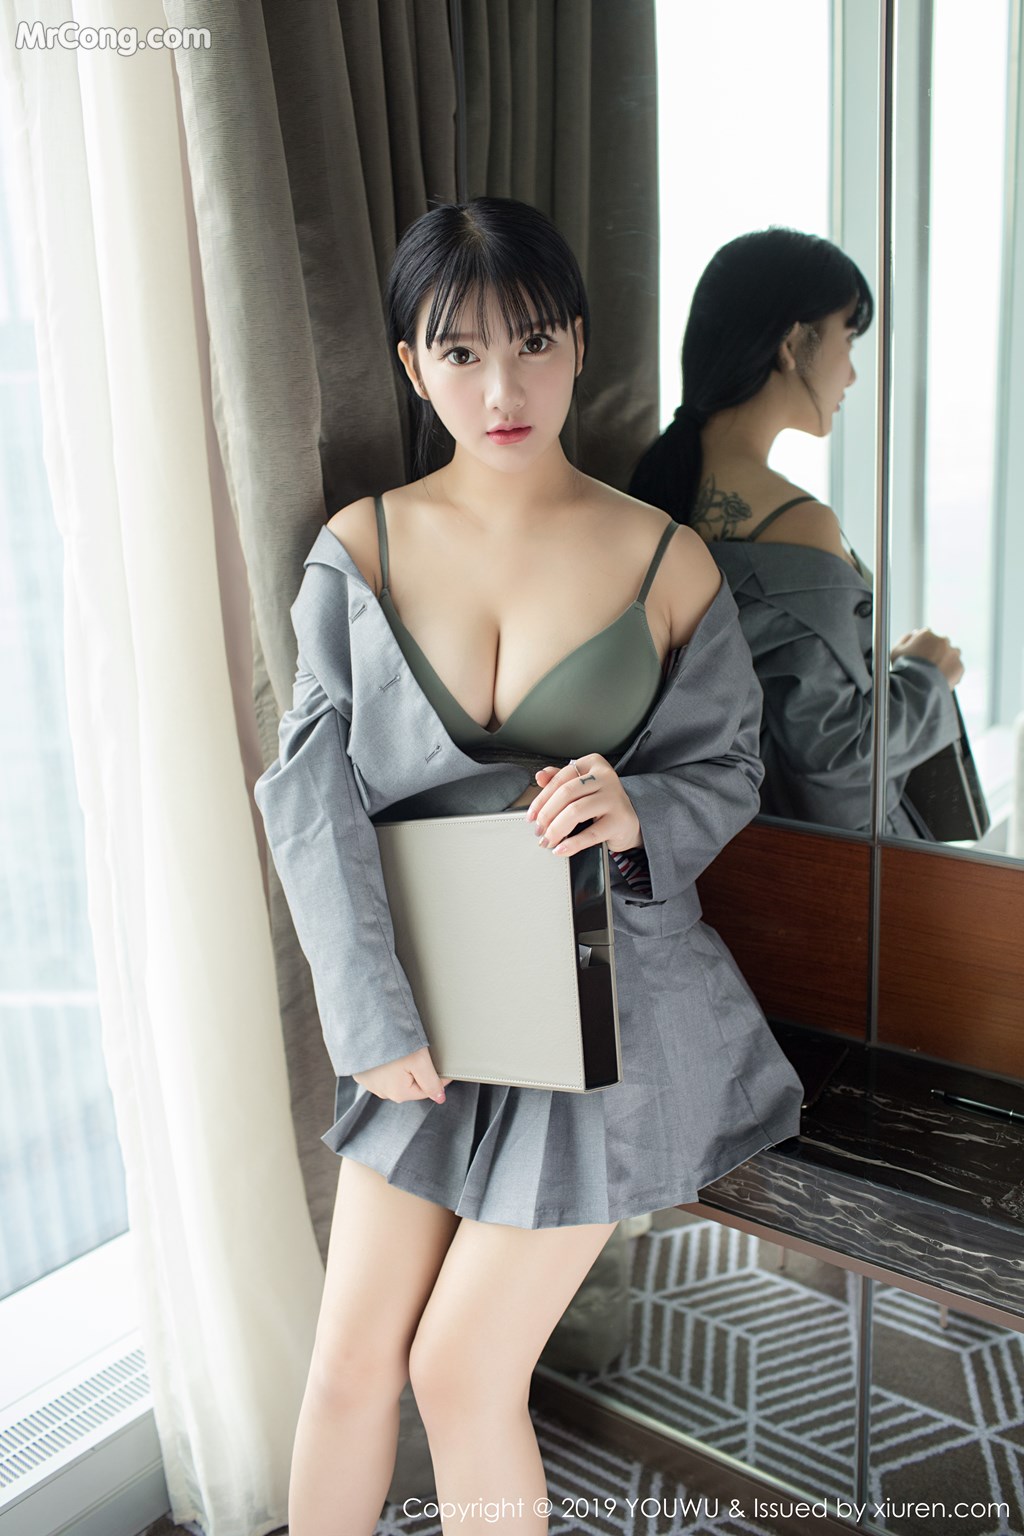 YouWu Vol.138: Xiao You Nai (小 尤奈) (60 pictures)